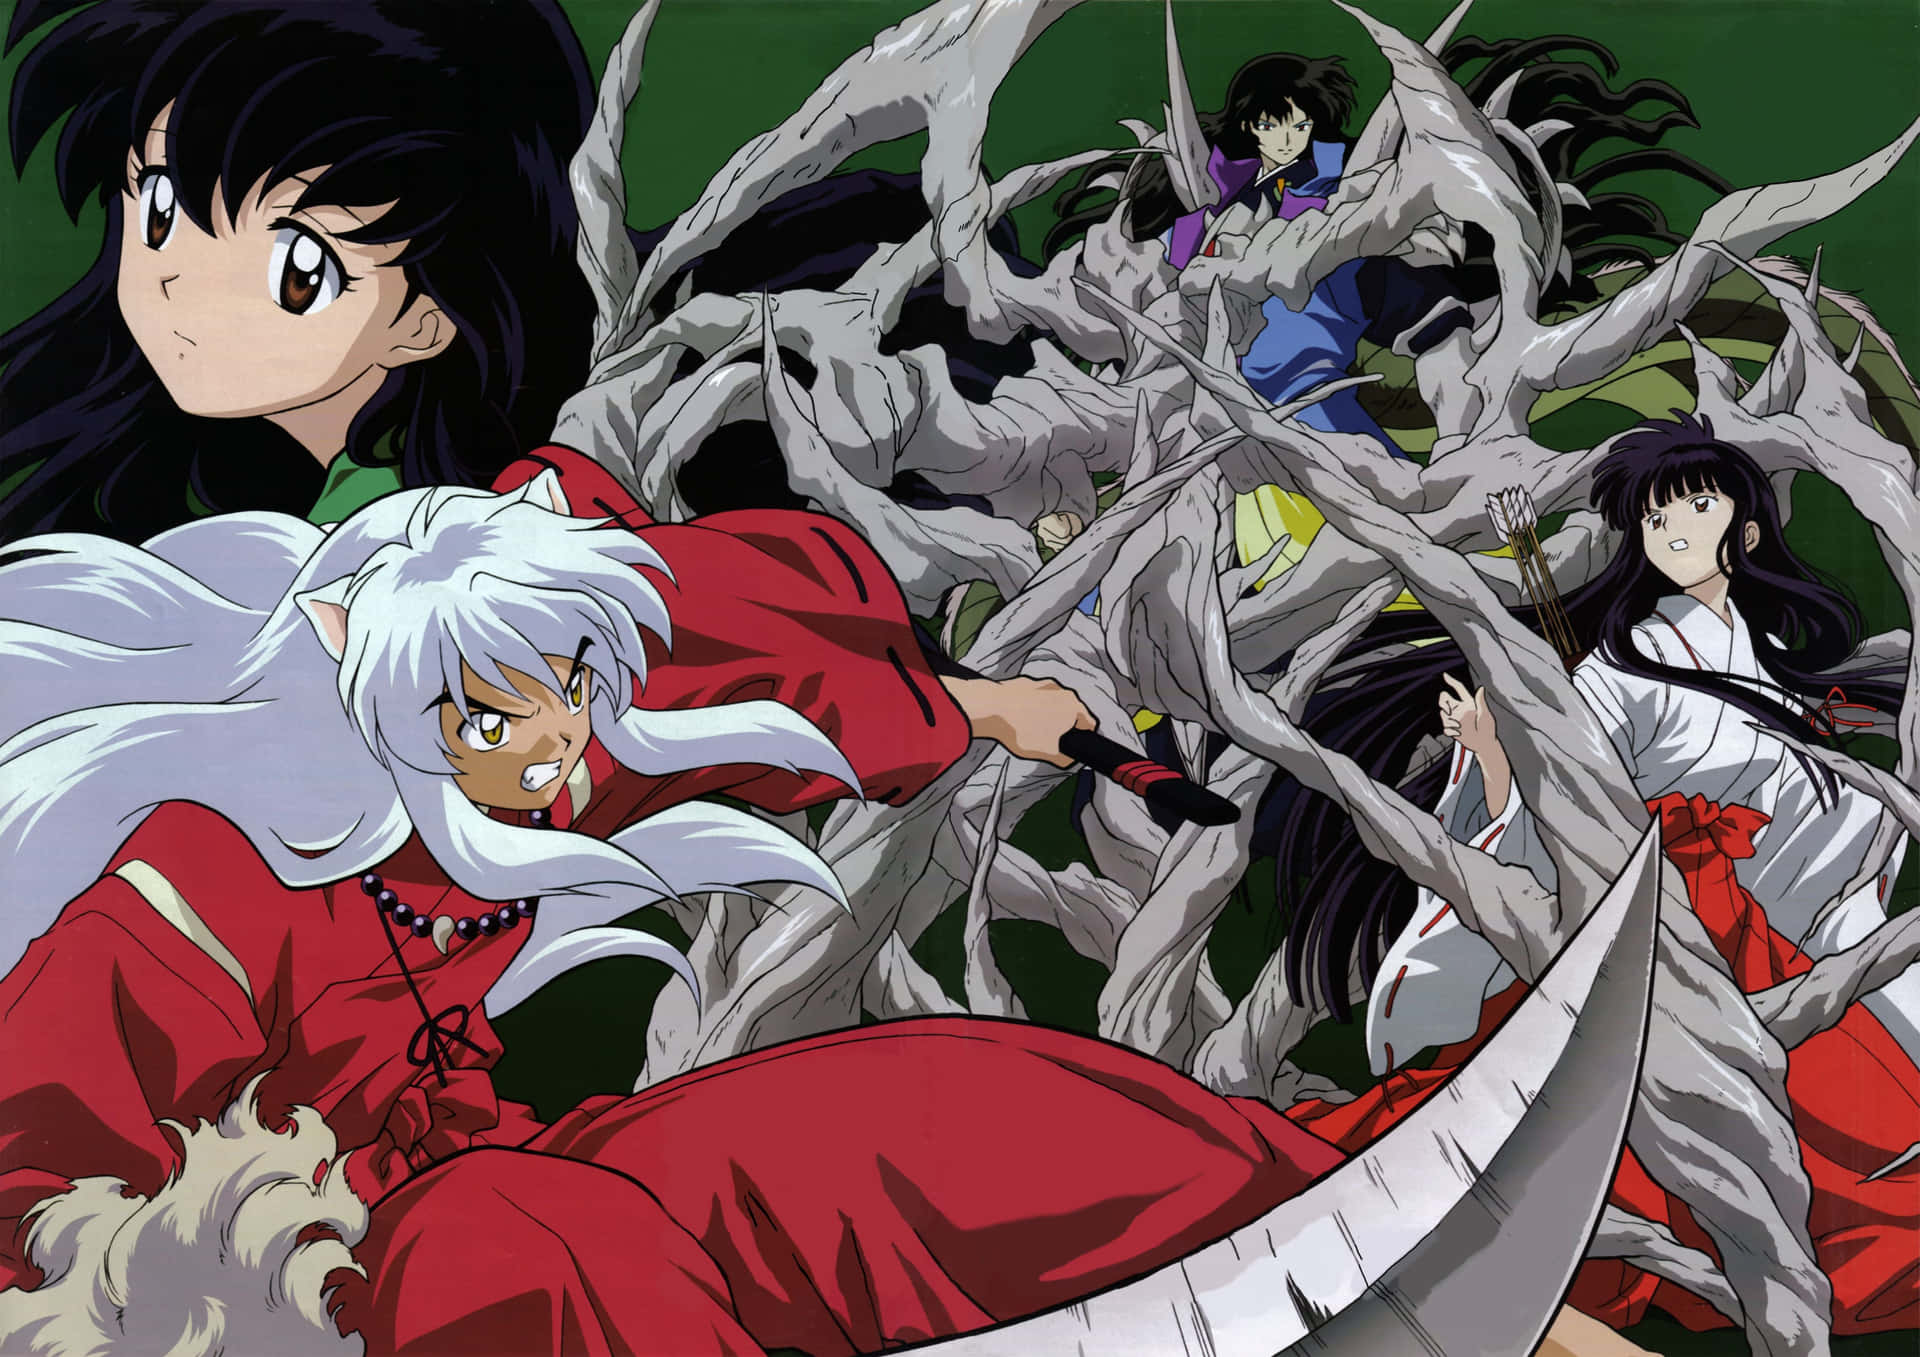 The beautiful world of Inuyasha comes alive in 4K Wallpaper